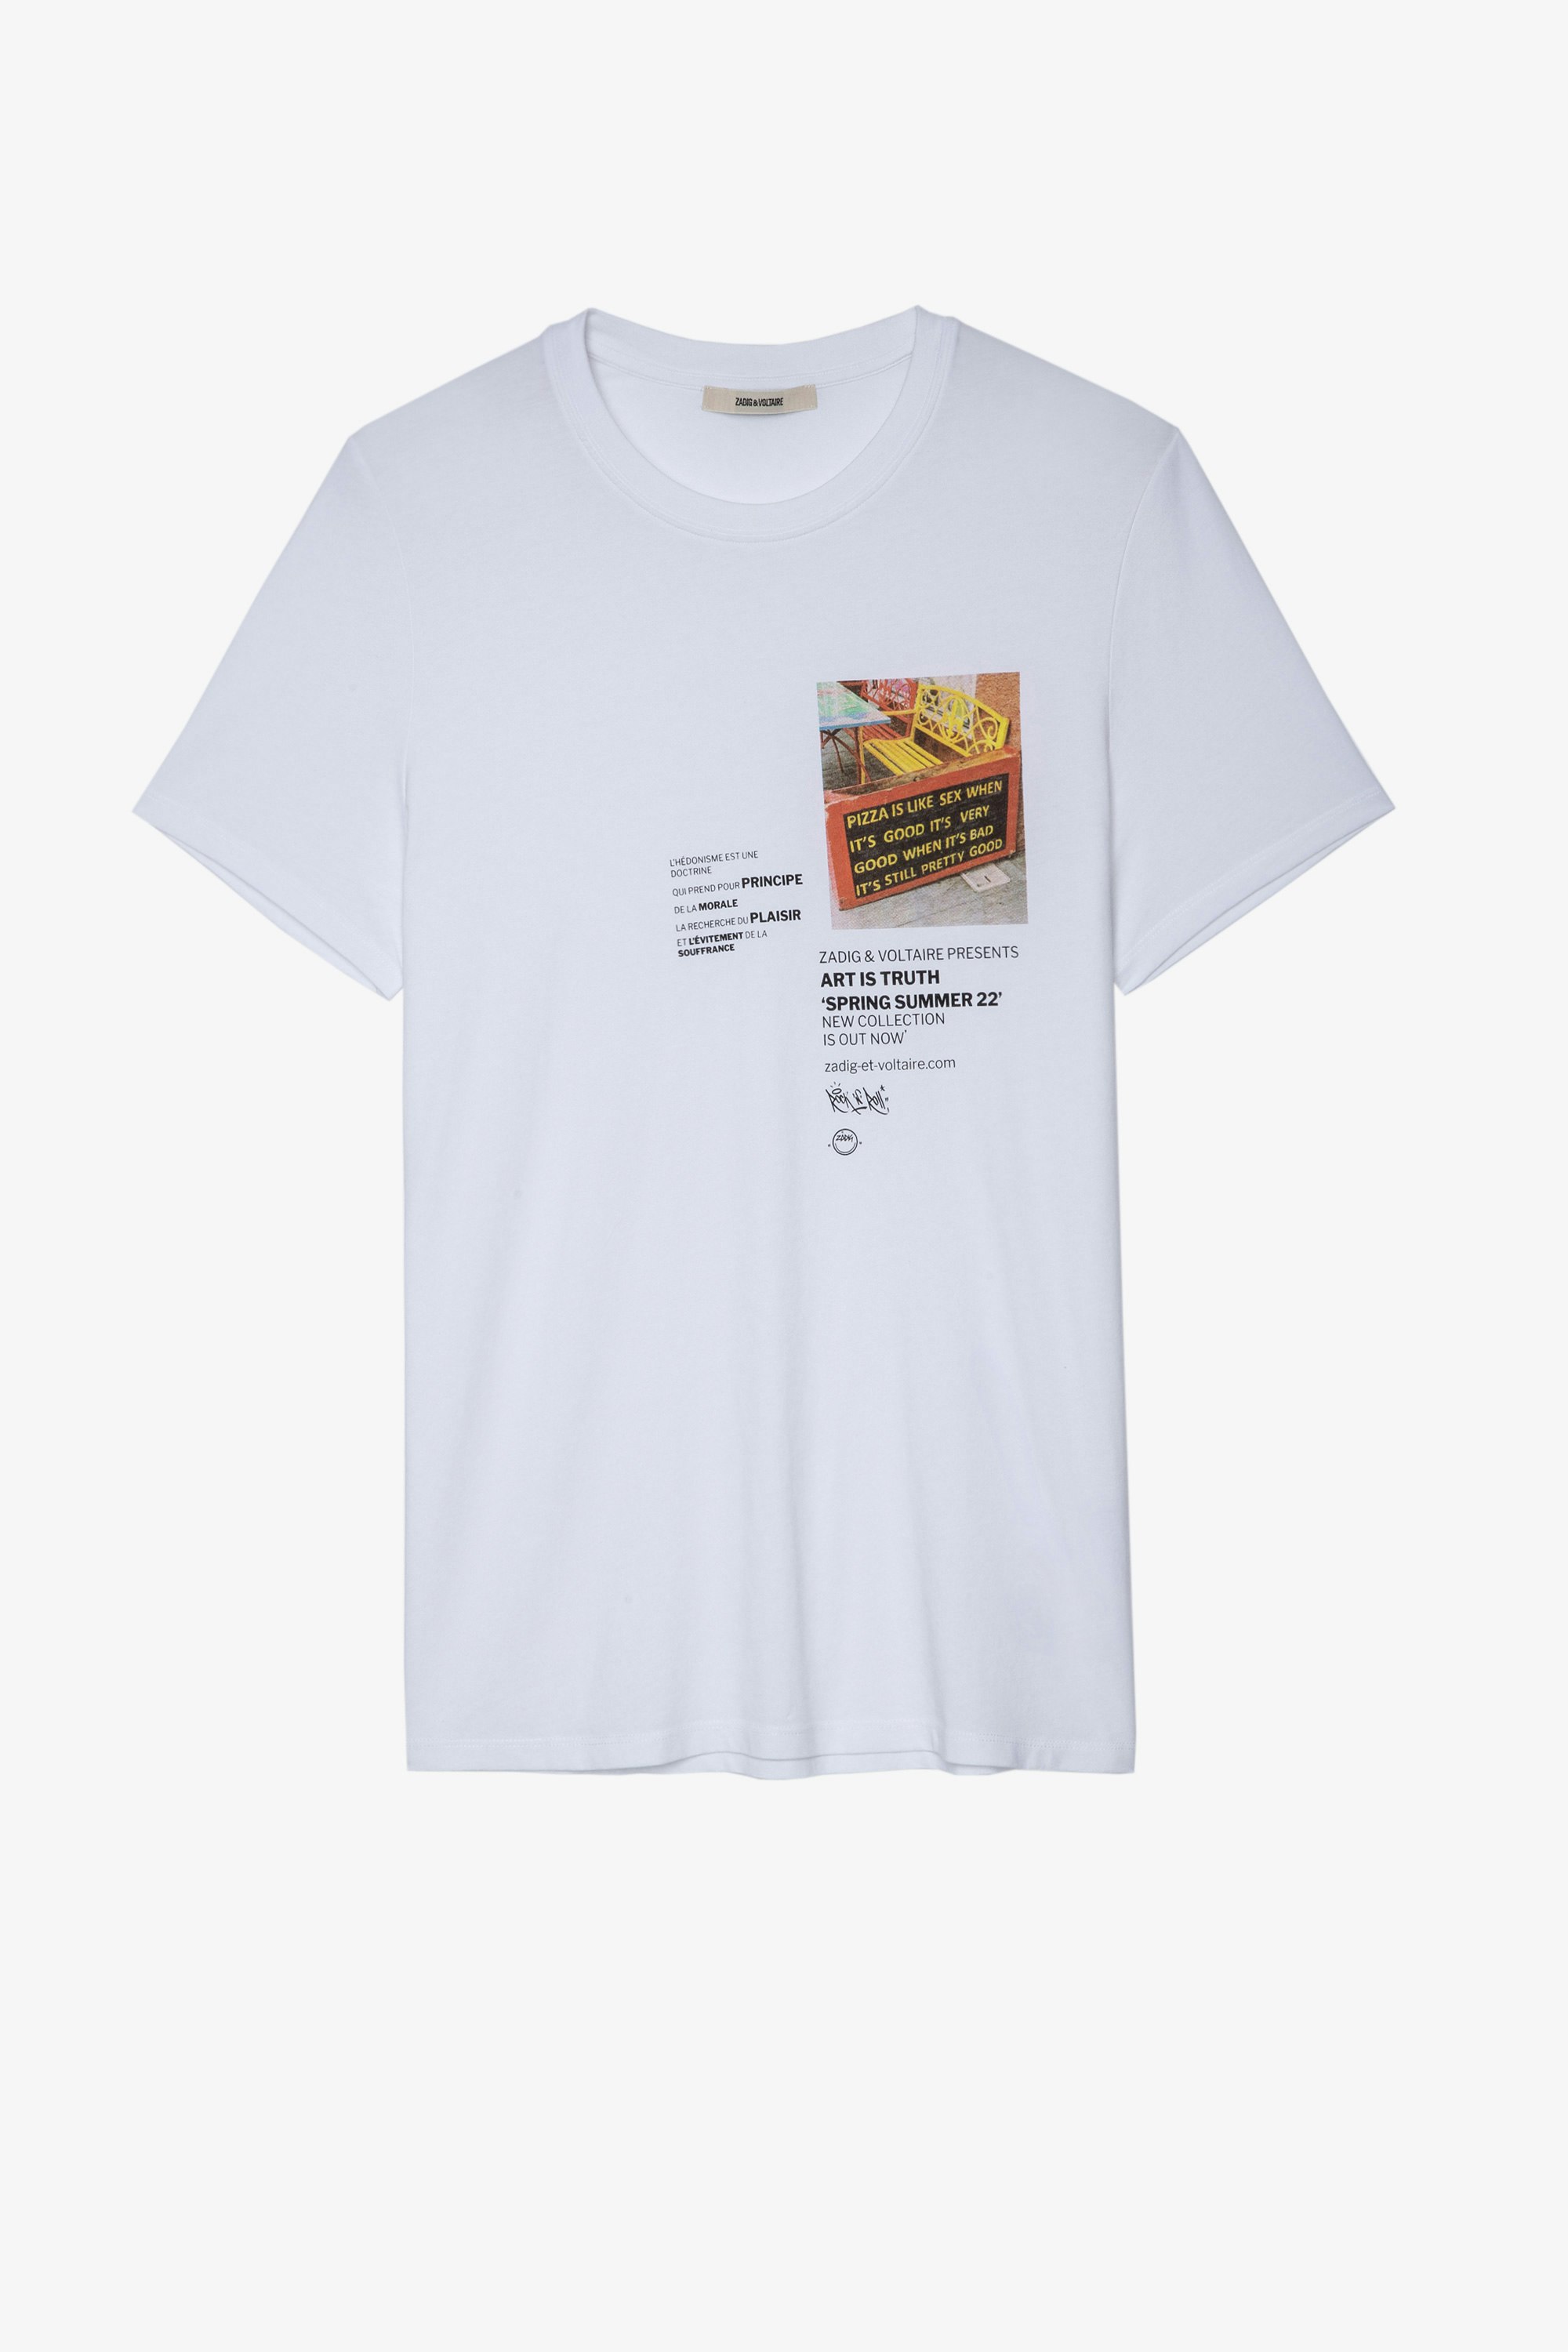 Ted T-Shirt Men's short-sleeved t-shirt in white cotton with text and photo print